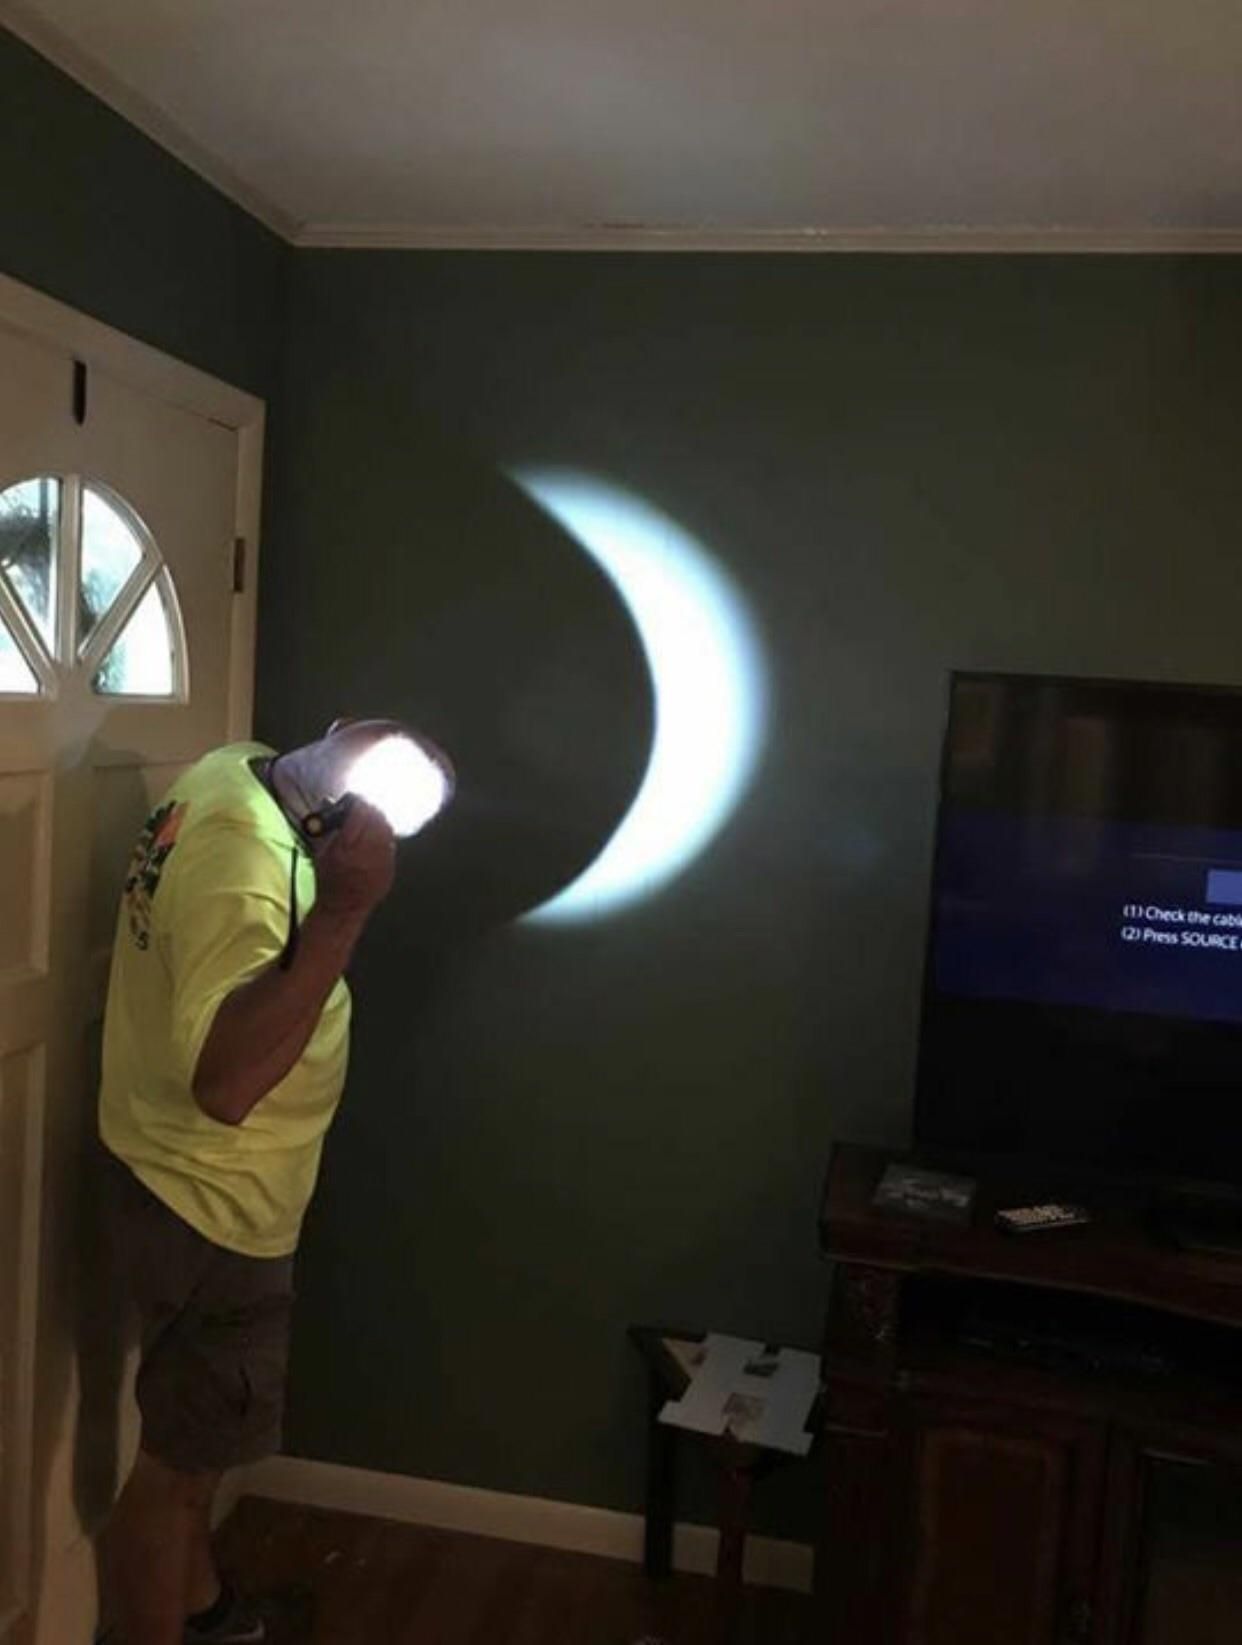 It stormed during the eclipse so my dad improvised.